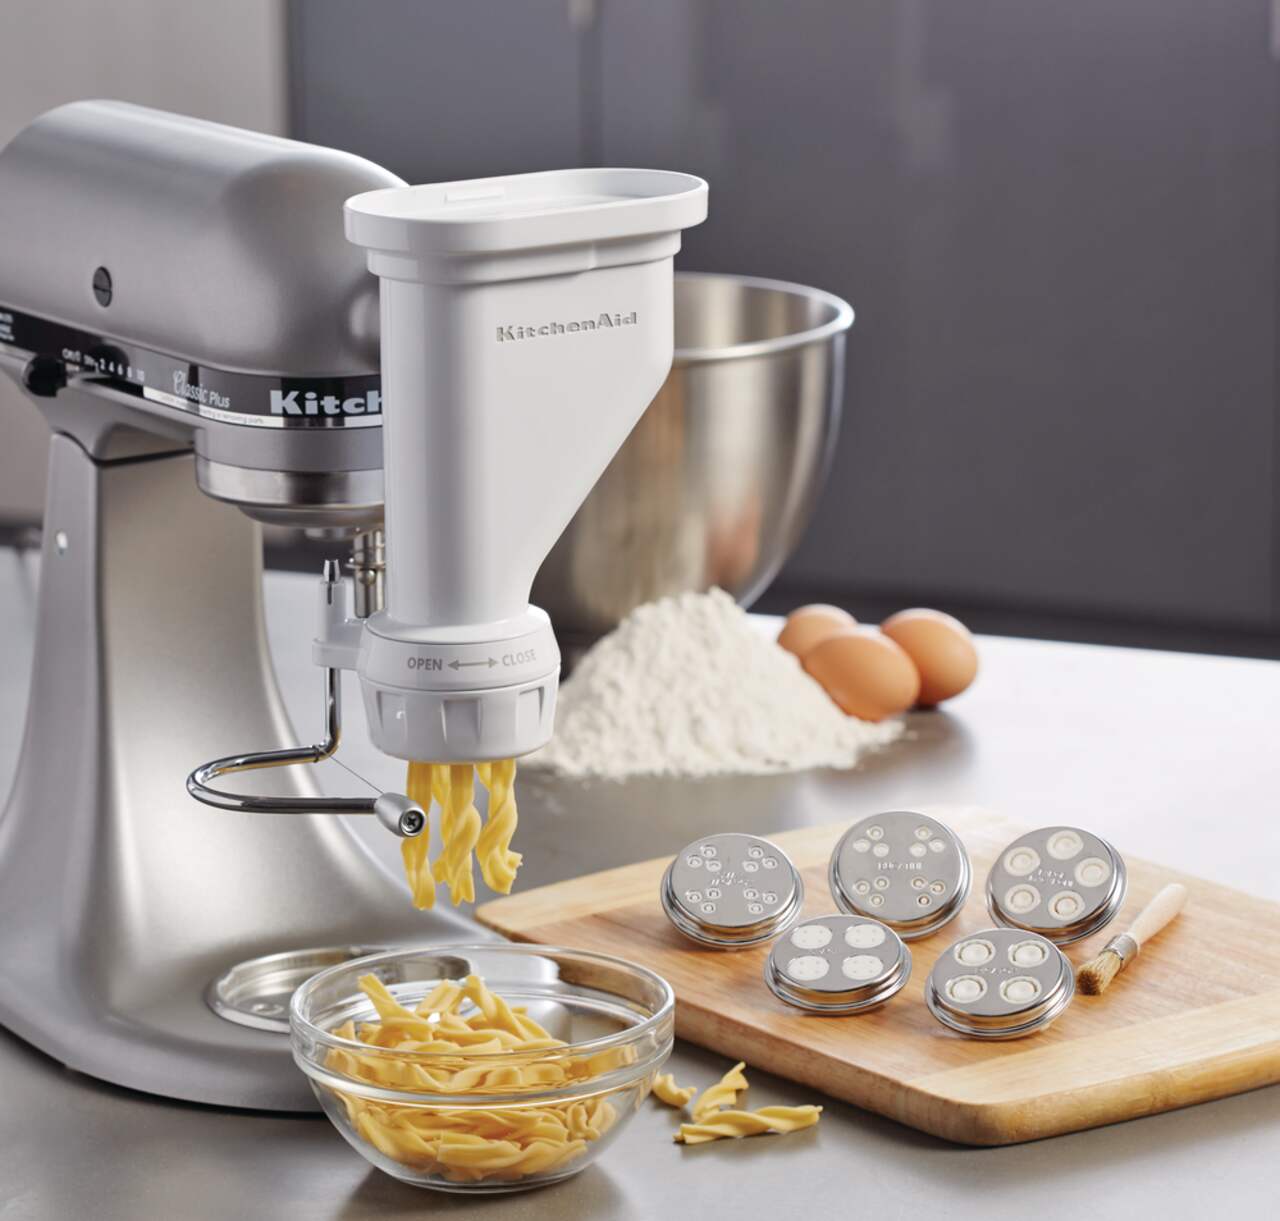 https://media-www.canadiantire.ca/product/living/kitchen/kitchen-appliances/0431432/kitchen-aid-pasta-extruder-attachment-1022d519-eeef-4bcf-b3ad-cc04cbfe1ec7.png?imdensity=1&imwidth=1244&impolicy=mZoom